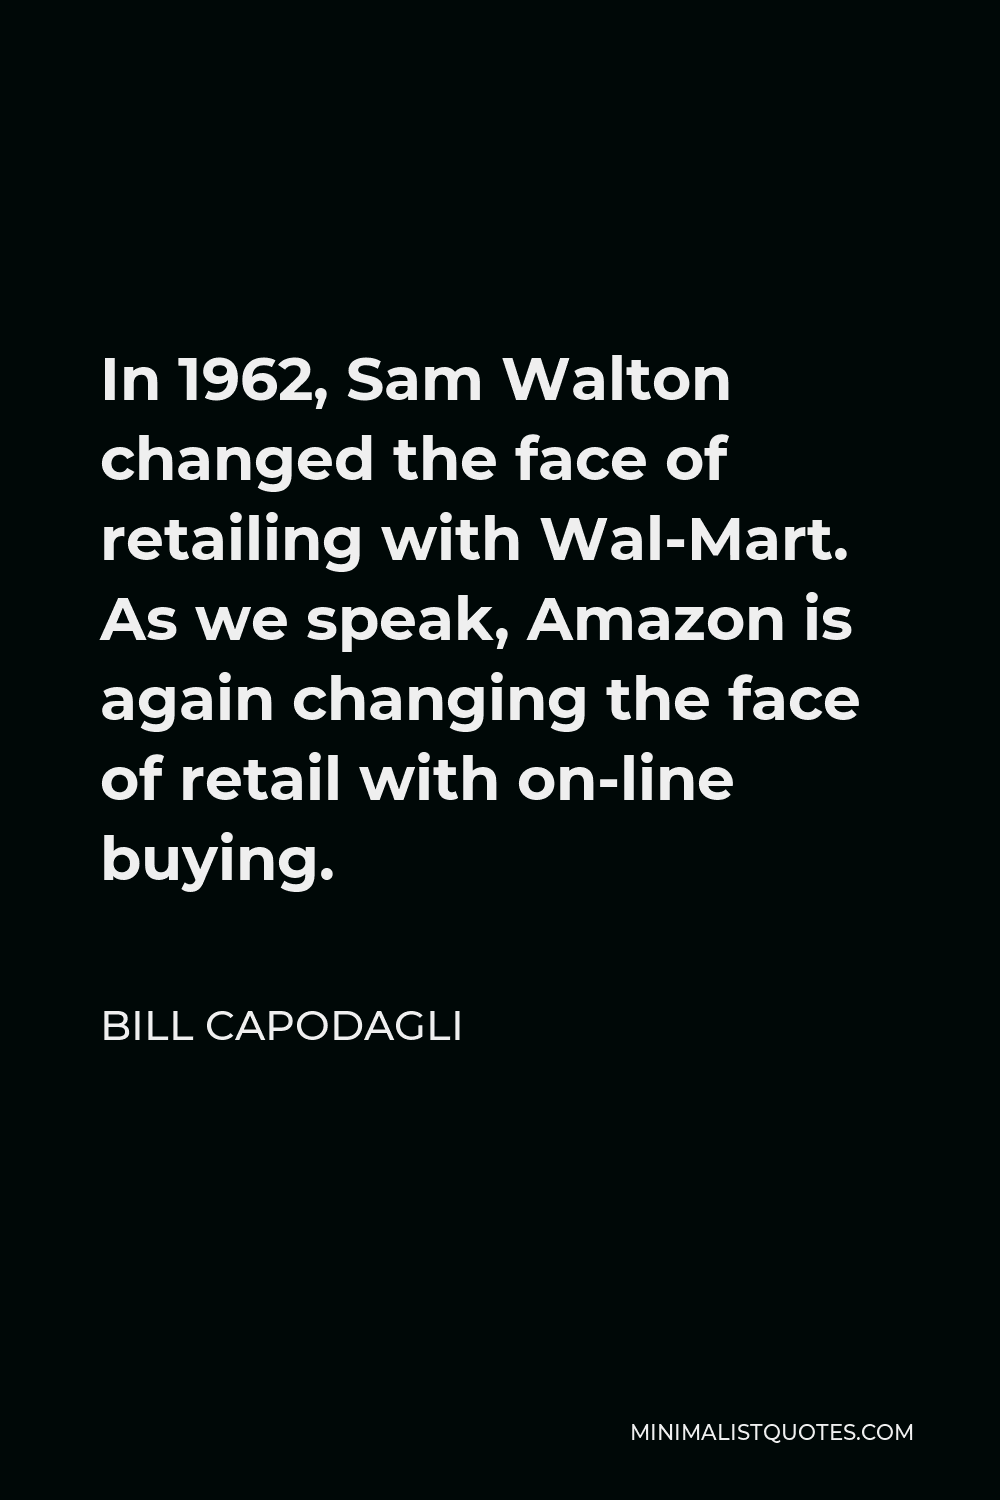 Bill Capodagli Quote - In 1962, Sam Walton changed the face of retailing with Wal-Mart. As we speak, Amazon is again changing the face of retail with on-line buying.